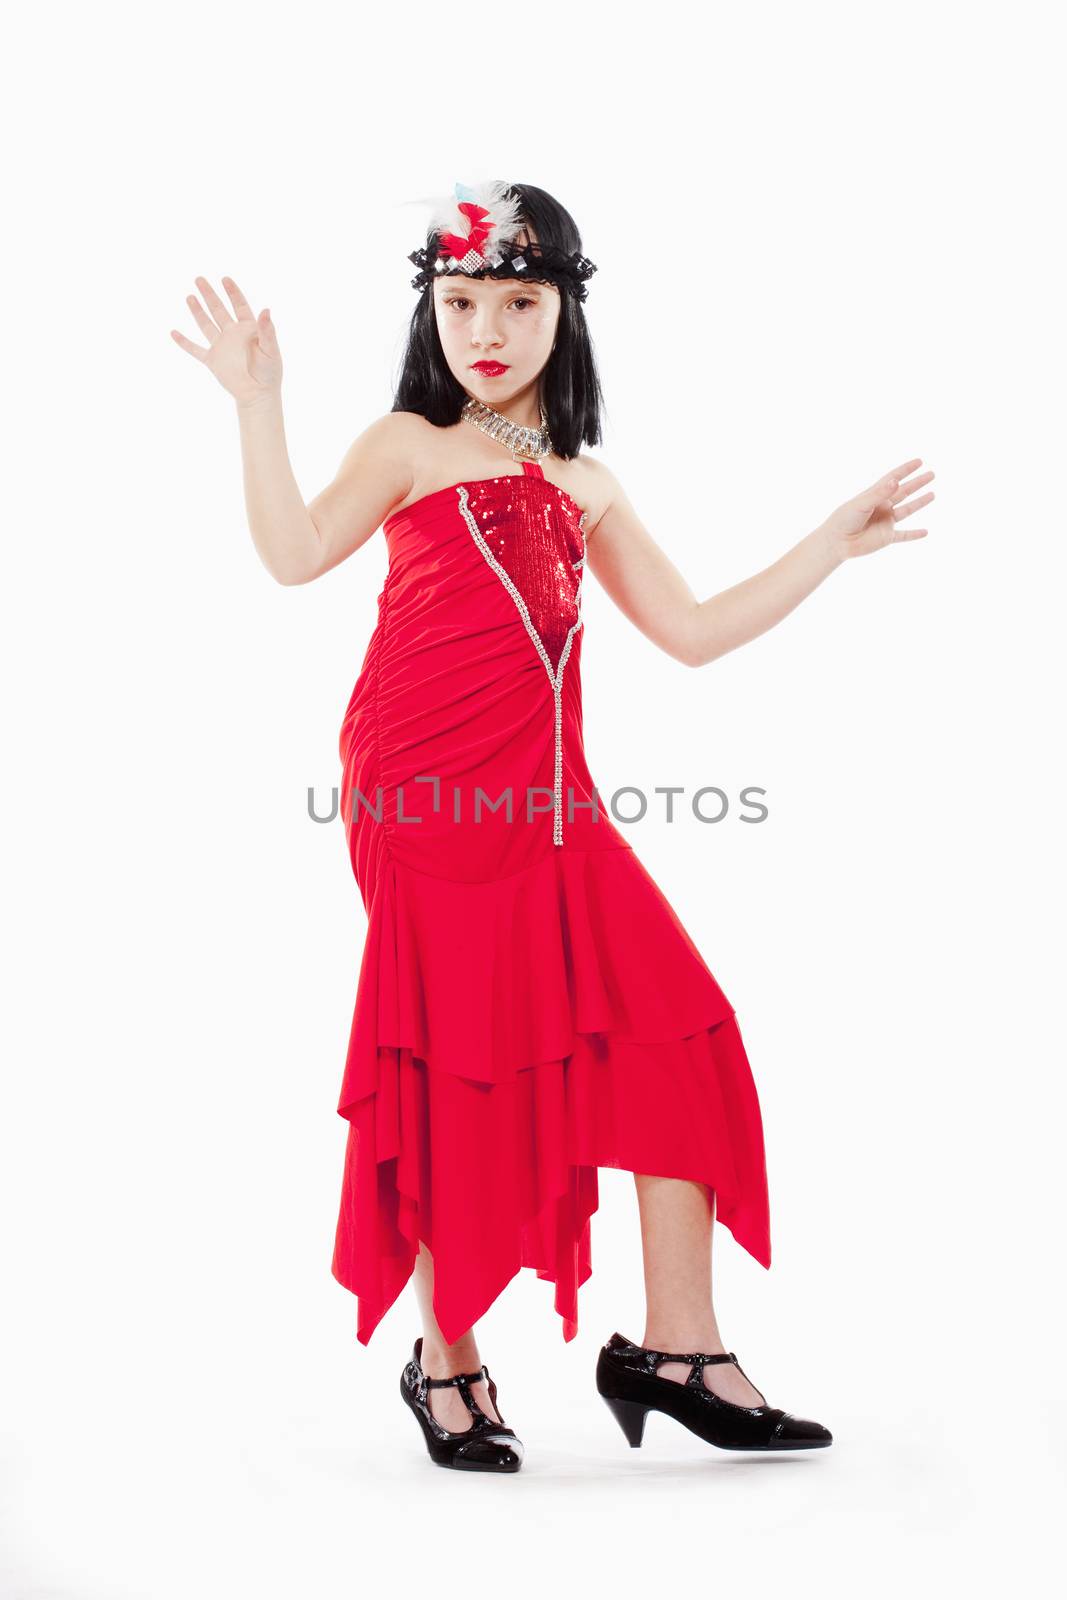 Little Girl in Wig and Red Dress in 1930ties Style by courtyardpix